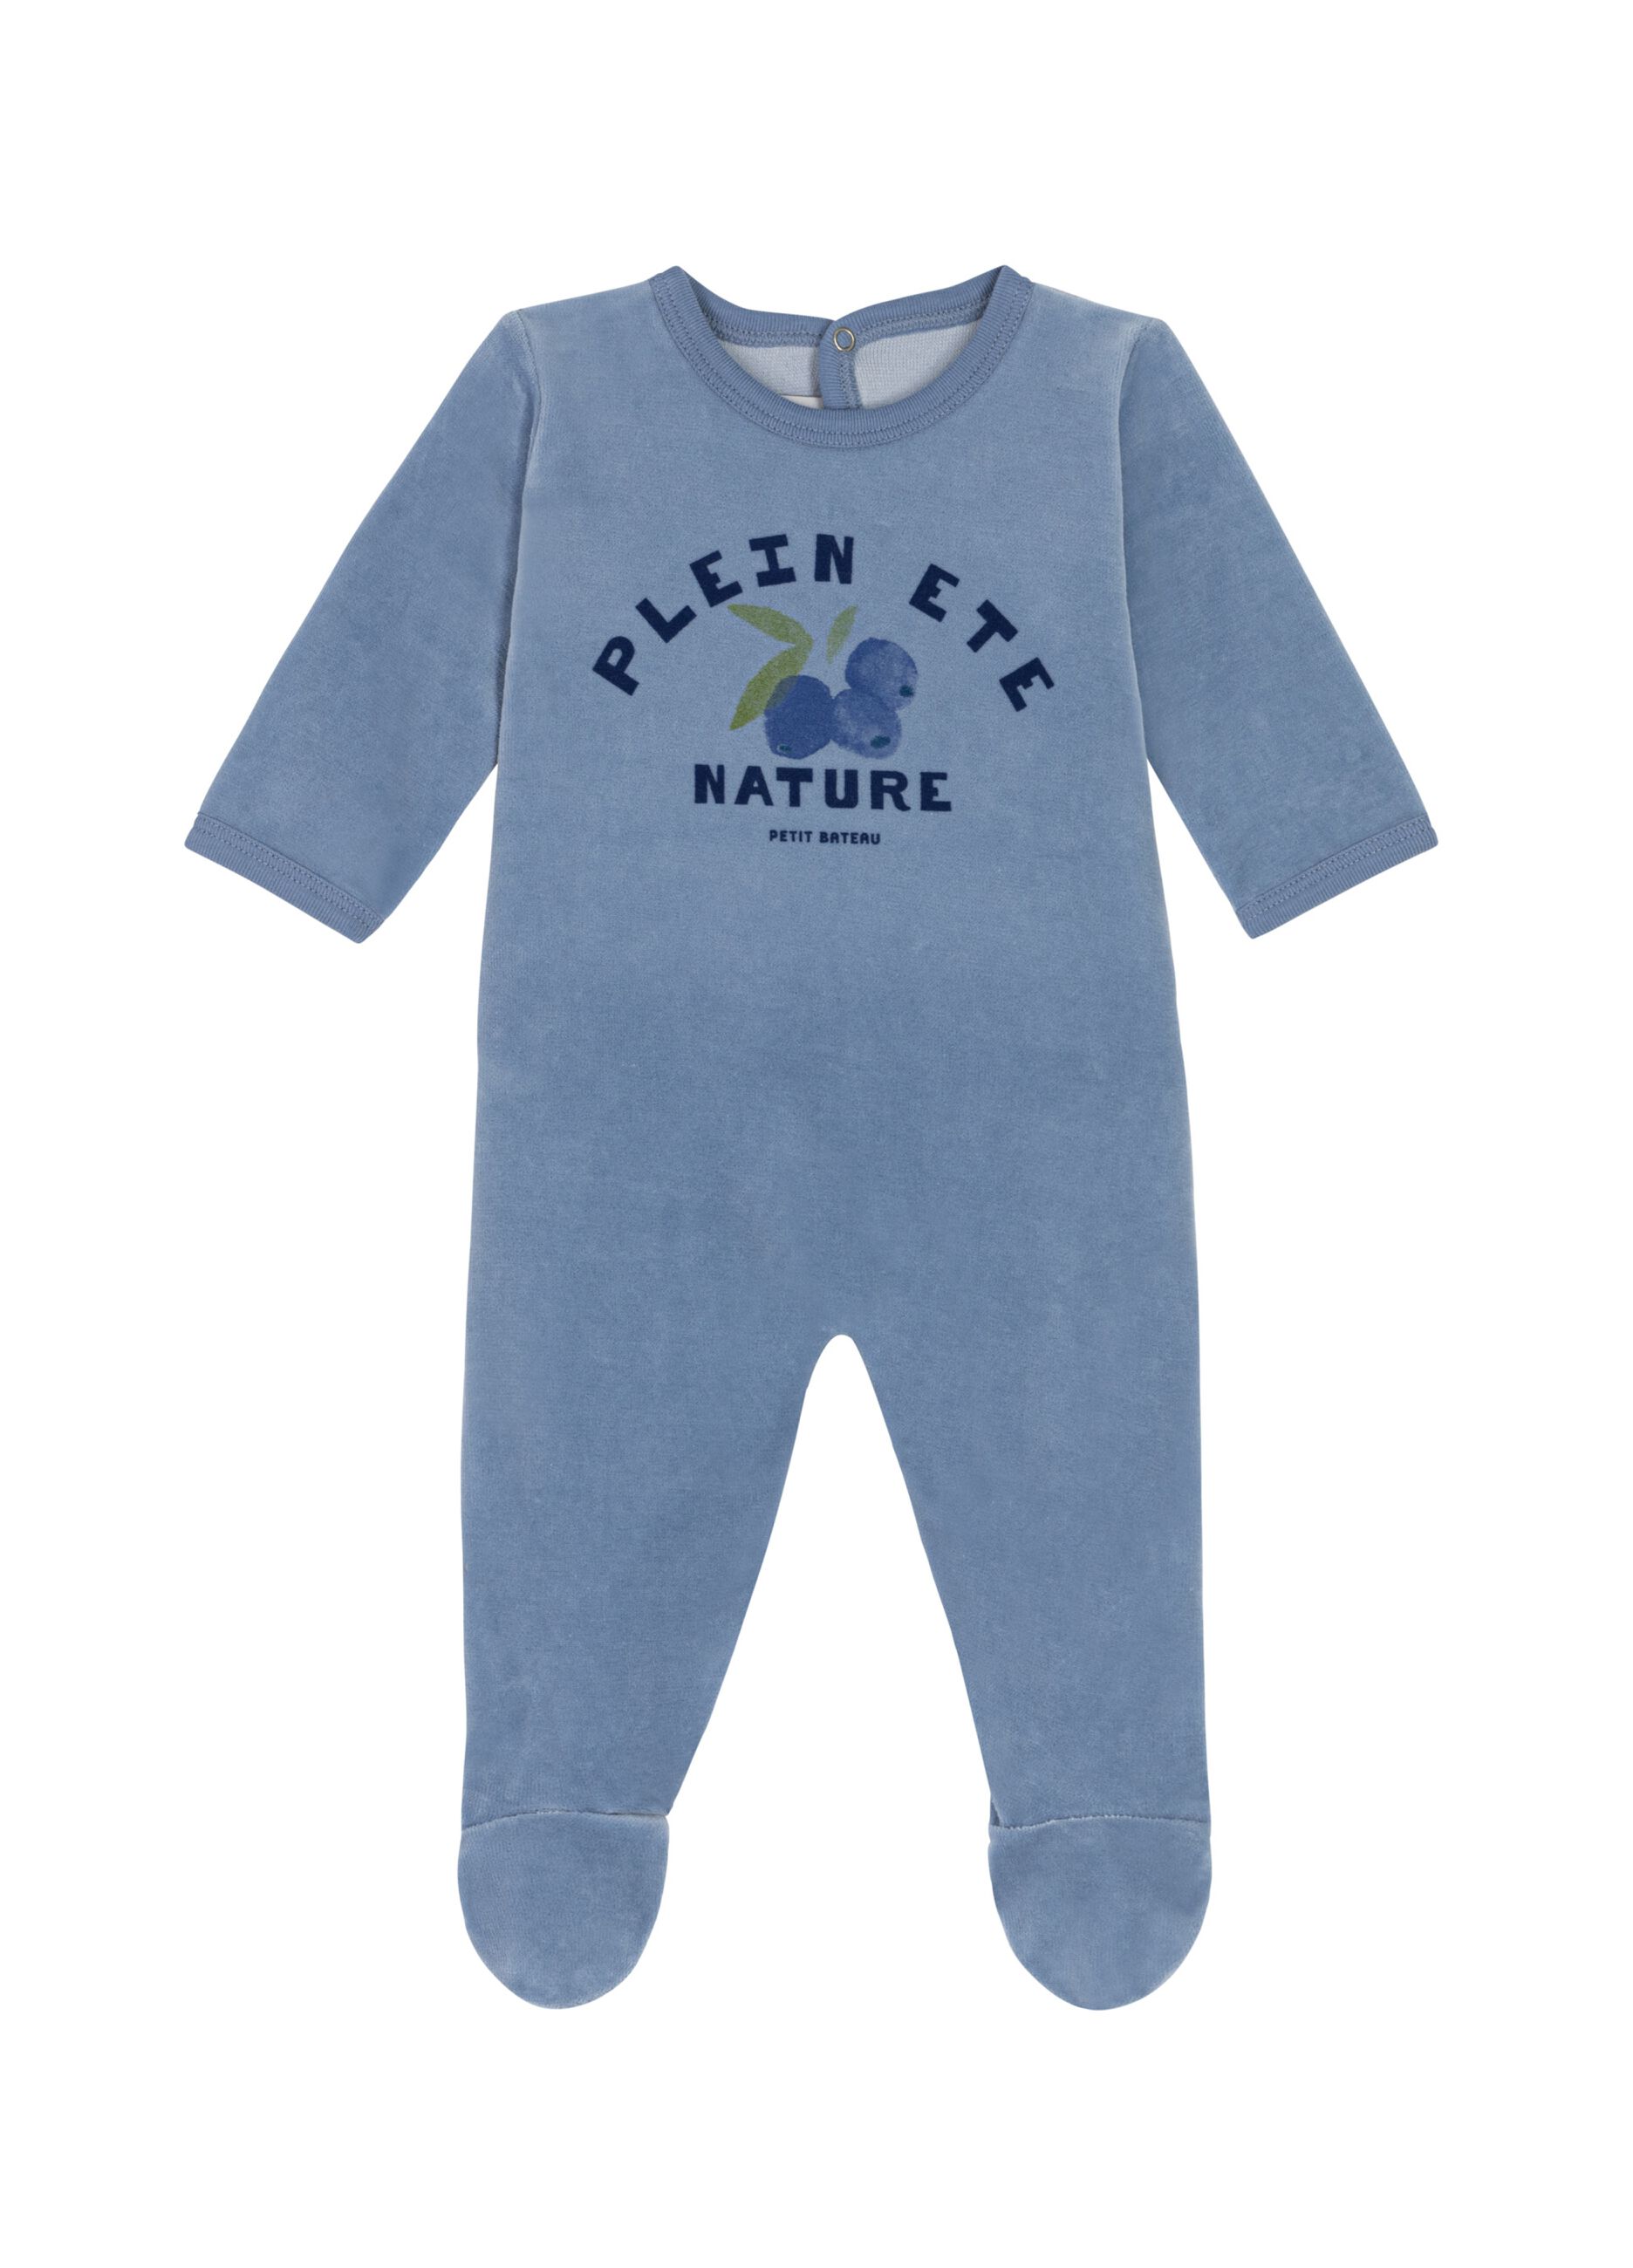 Onesie with feet and blueberries print